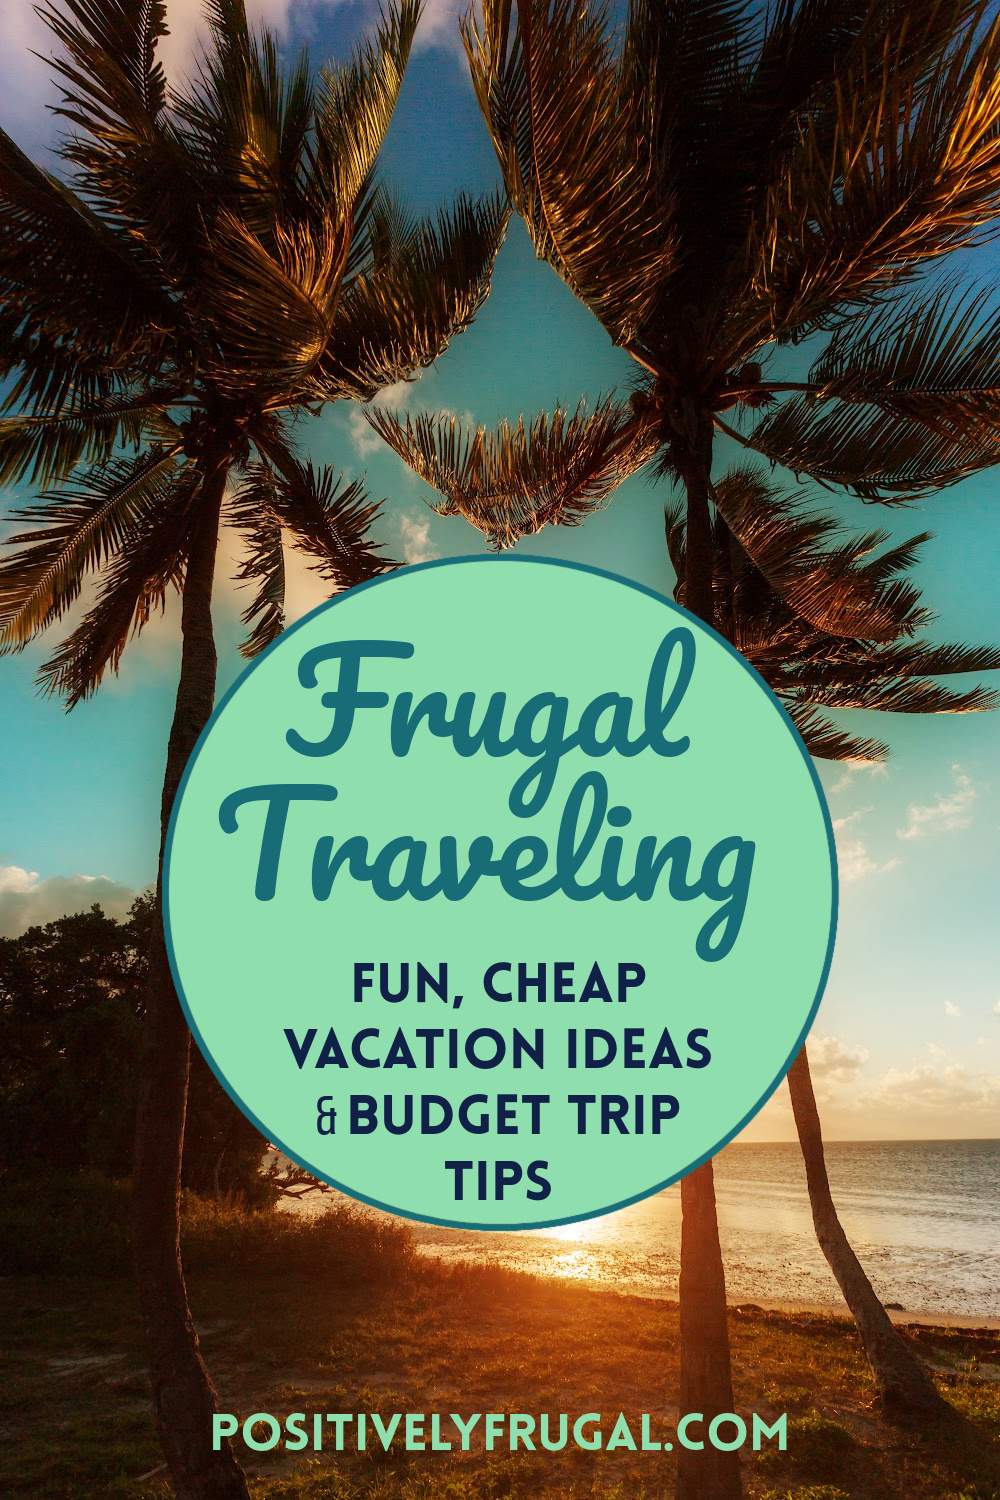 Frugal Traveling Fun Cheap Vacation Ideas Budget Trip Tips by PositivelyFrugal.com